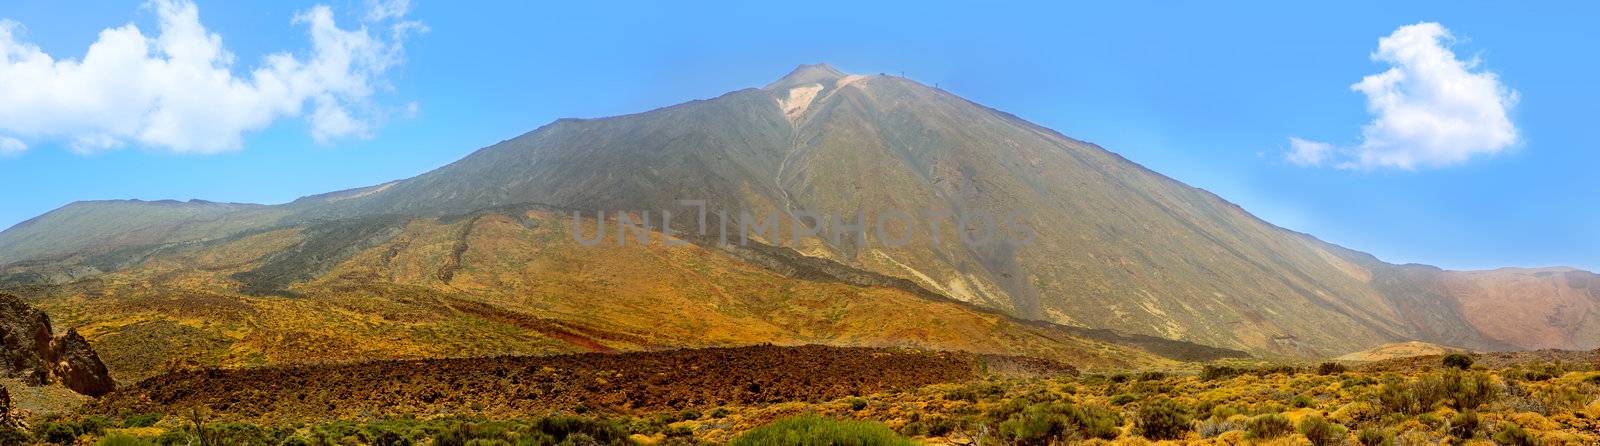 Teide National Park mountain in Tenerife panorama at Canary Islands